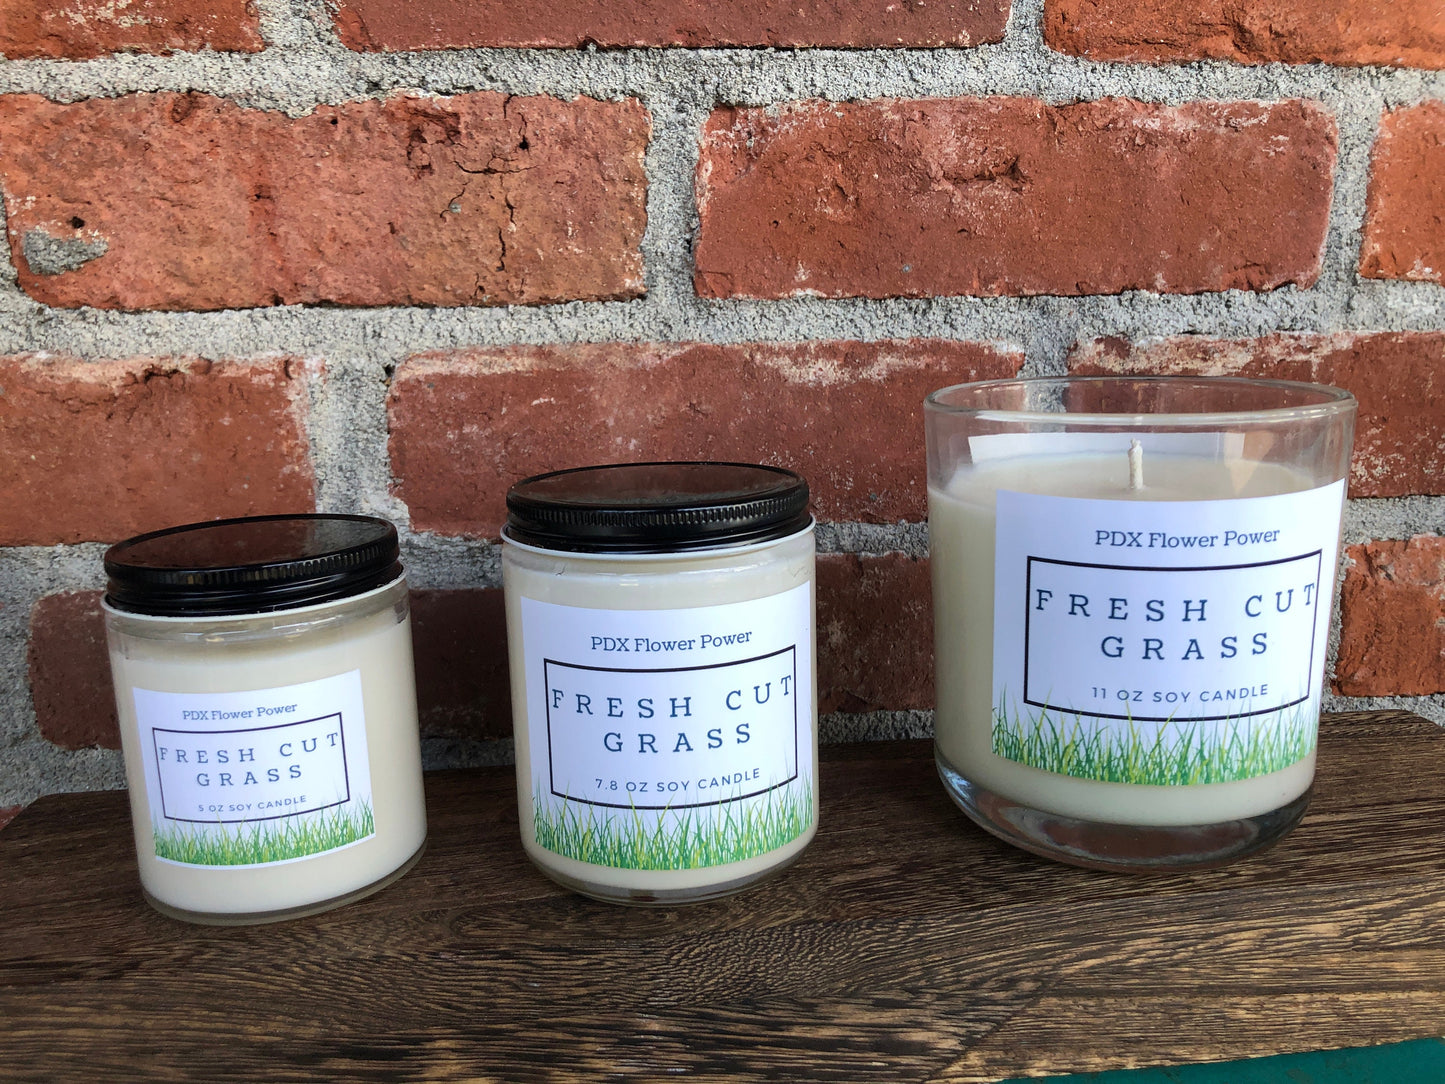 PDX Flower Power  " Fresh Cut Grass" handcrafted soy candle